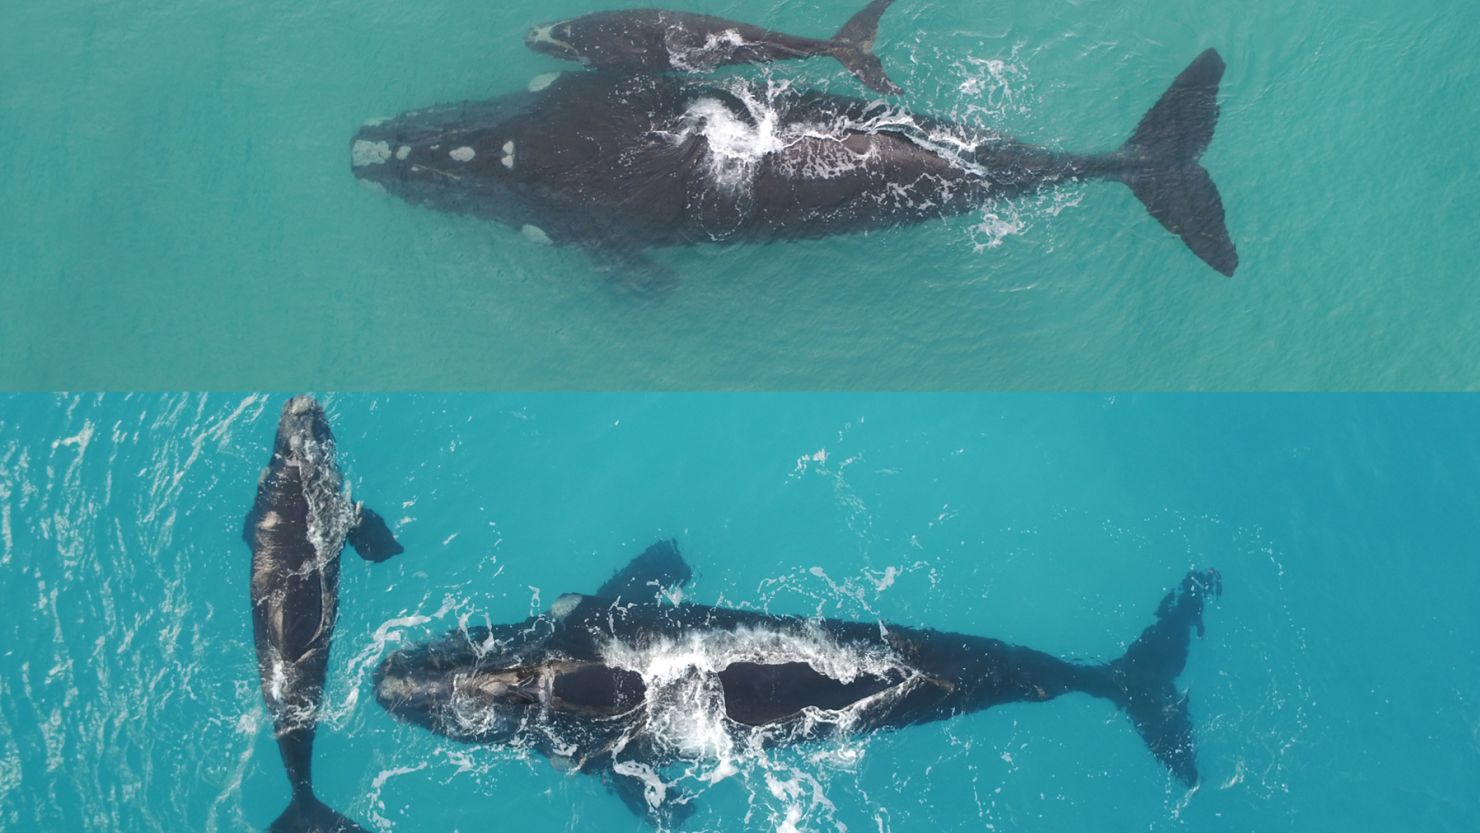 Maybeline and her calf on July 2 (top) and August 31 (bottom). The mother lost 16 inches (40 centimeters) in width while her calf gained 5 feet  (1.53 meters) in length.